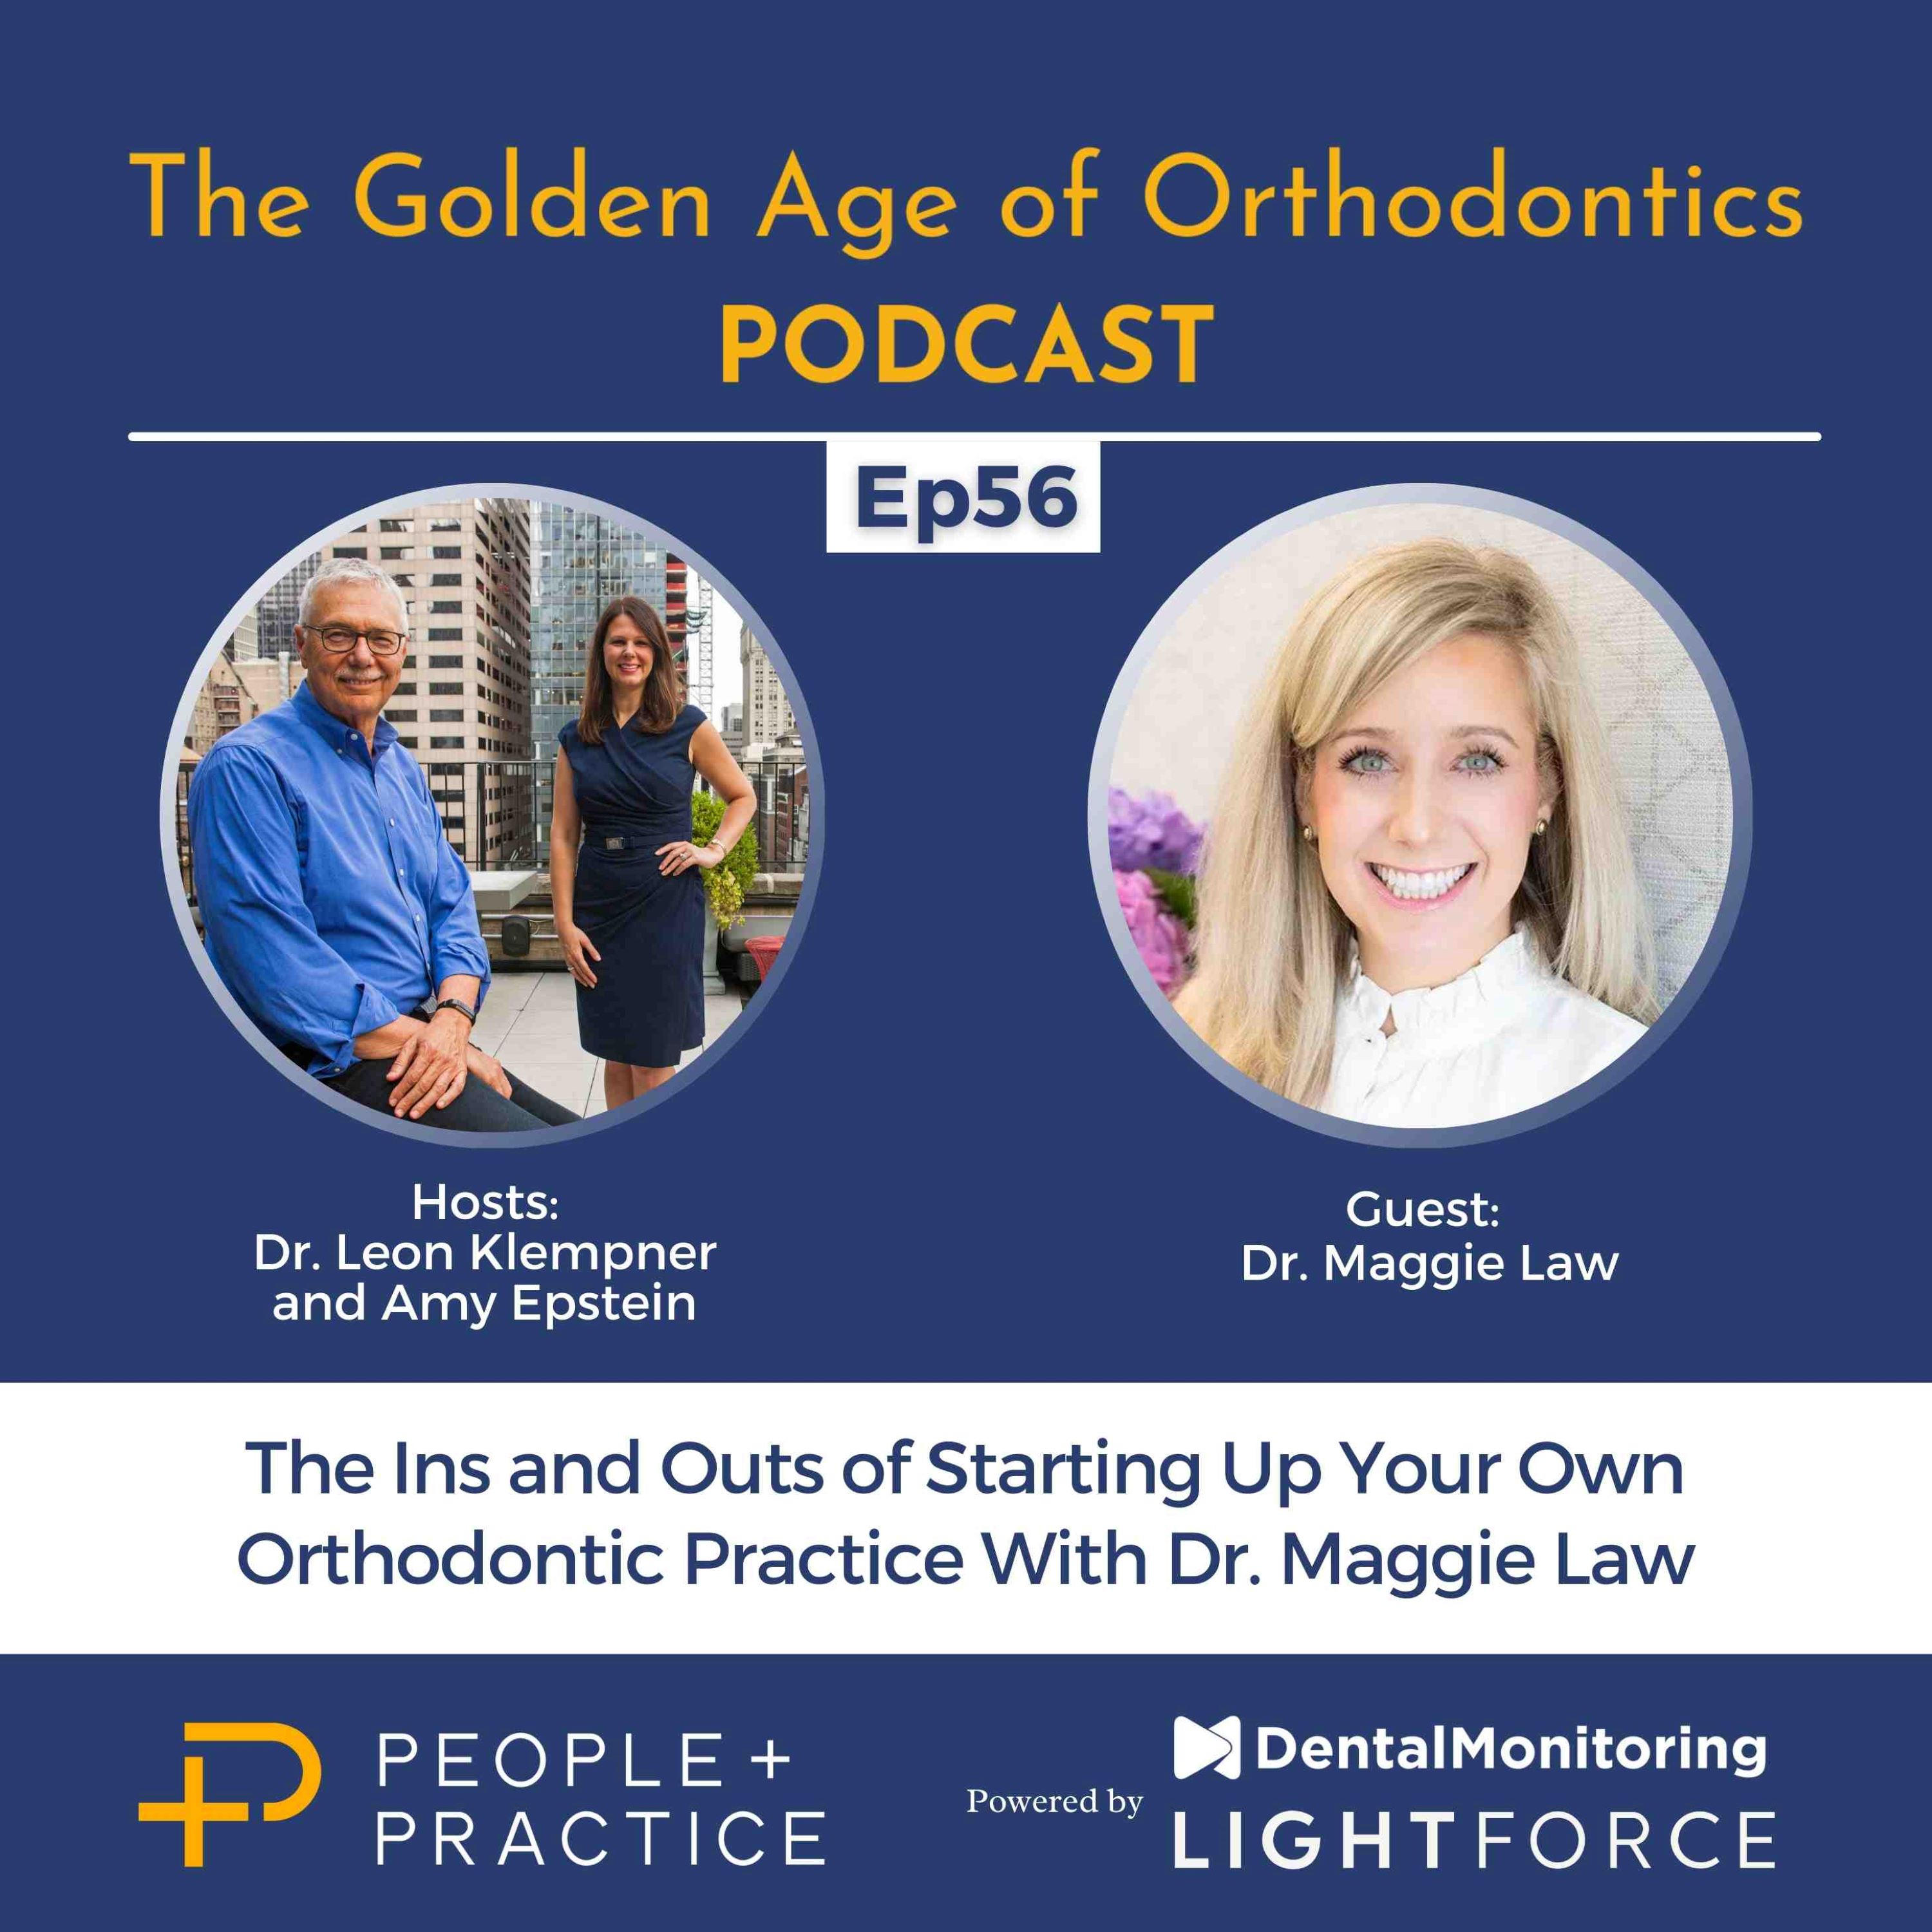 The Ins and Outs of Starting Up Your Own Orthodontic Practice With Dr. Maggie Law